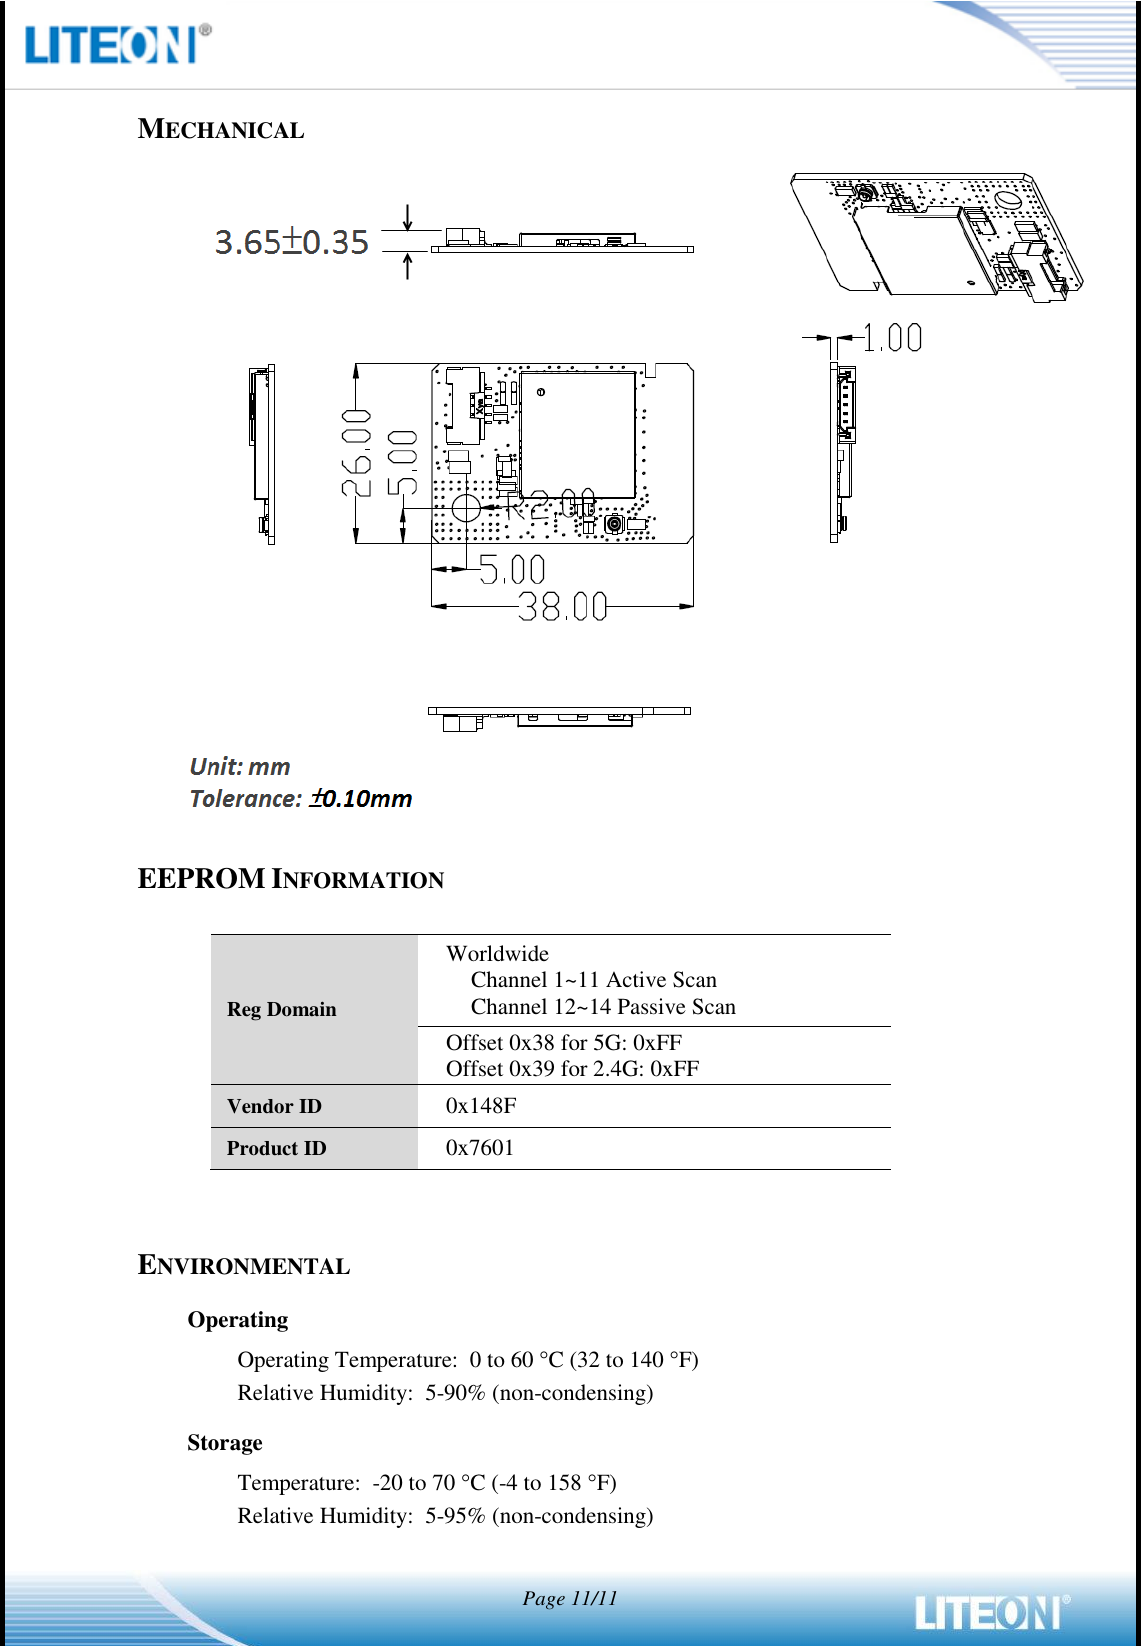   Page 11/11   MECHANICAL   EEPROM INFORMATION  Reg Domain Worldwide Channel 1~11 Active Scan Channel 12~14 Passive Scan Offset 0x38 for 5G: 0xFF Offset 0x39 for 2.4G: 0xFF Vendor ID 0x148F Product ID 0x7601   ENVIRONMENTAL Operating Operating Temperature:  0 to 60 C (32 to 140 F) Relative Humidity:  5-90% (non-condensing) Storage Temperature:  -20 to 70 C (-4 to 158 F) Relative Humidity:  5-95% (non-condensing) 